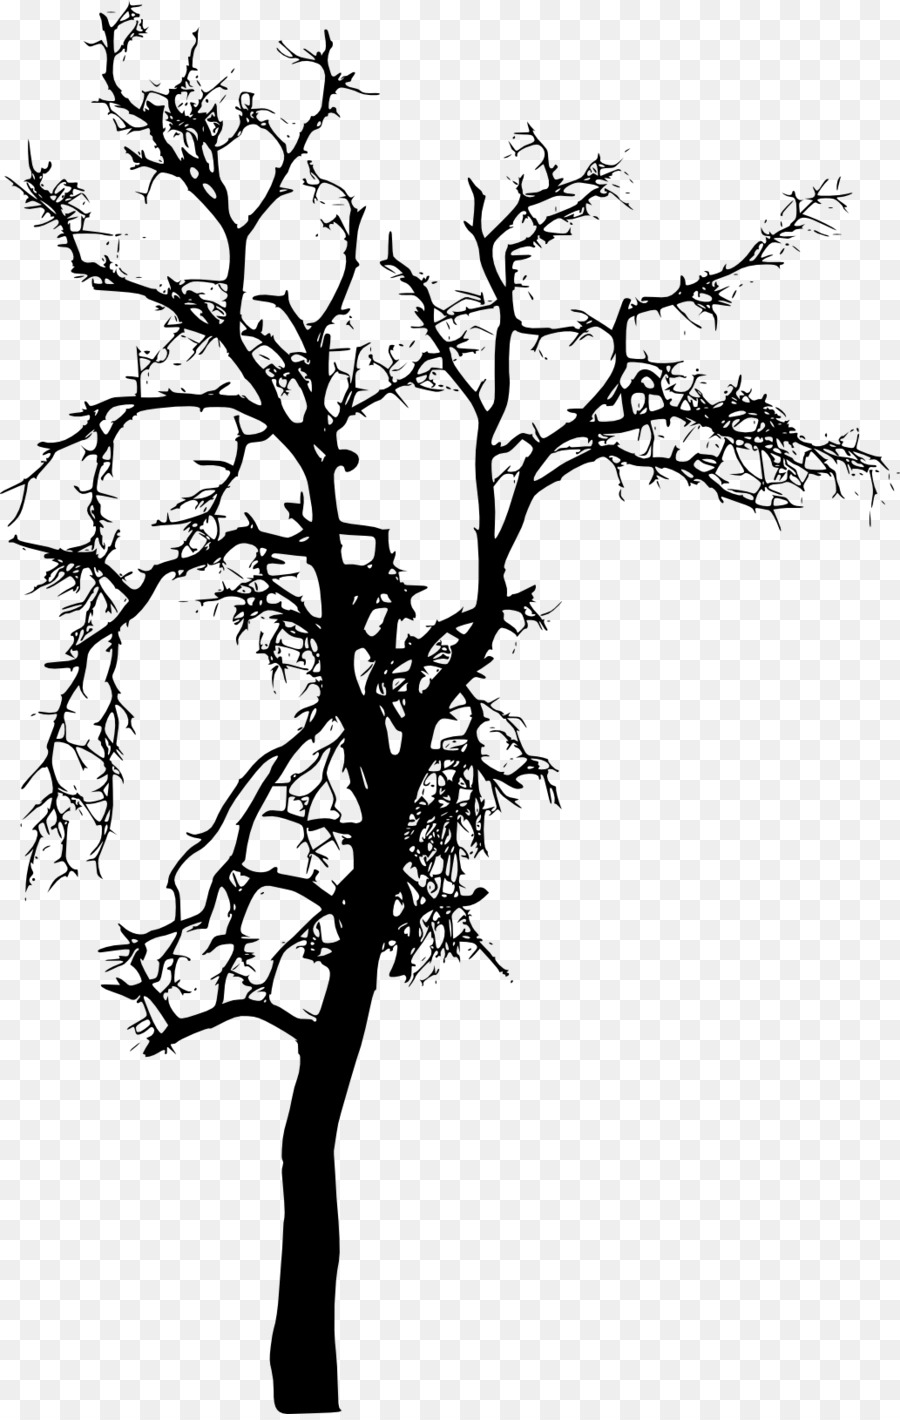 Free Tree Branch Silhouette Png, Download Free Tree Branch Silhouette ...